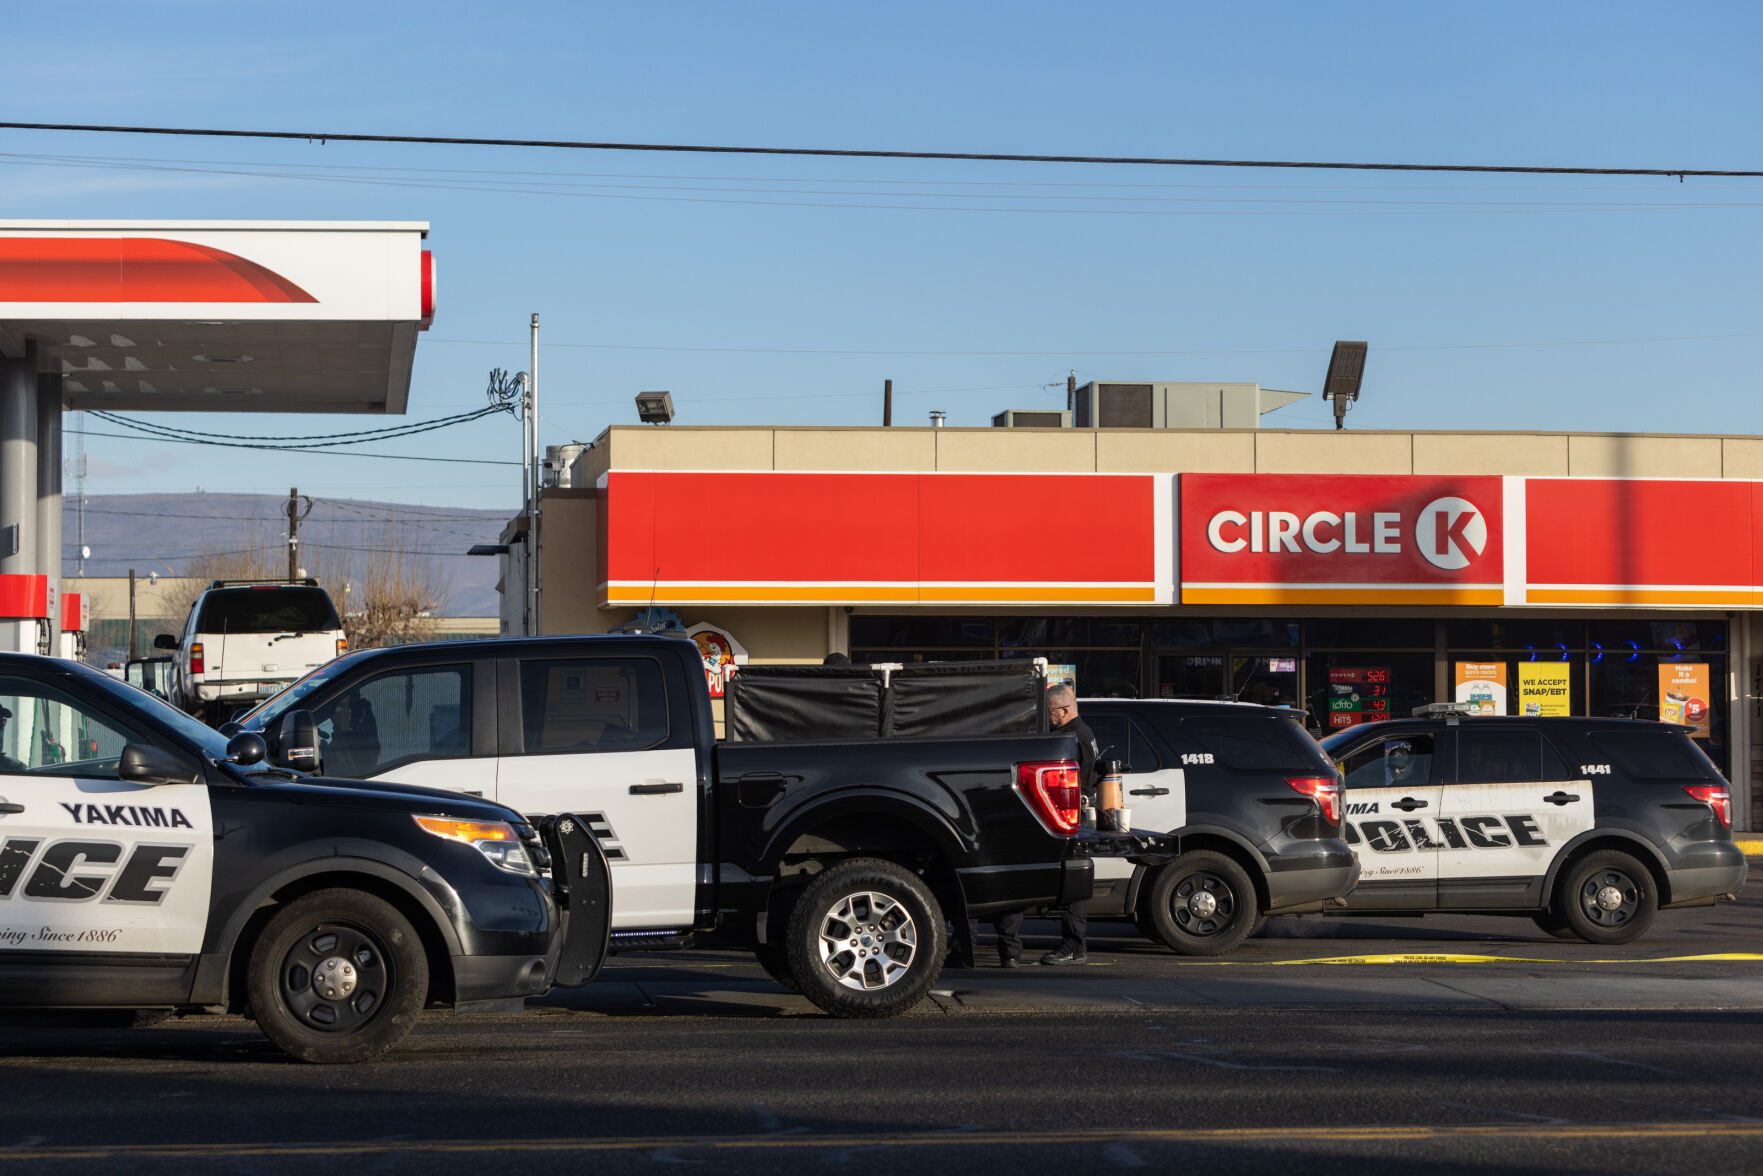 Suspect dead after 3 killed in Yakima convenience store shooting